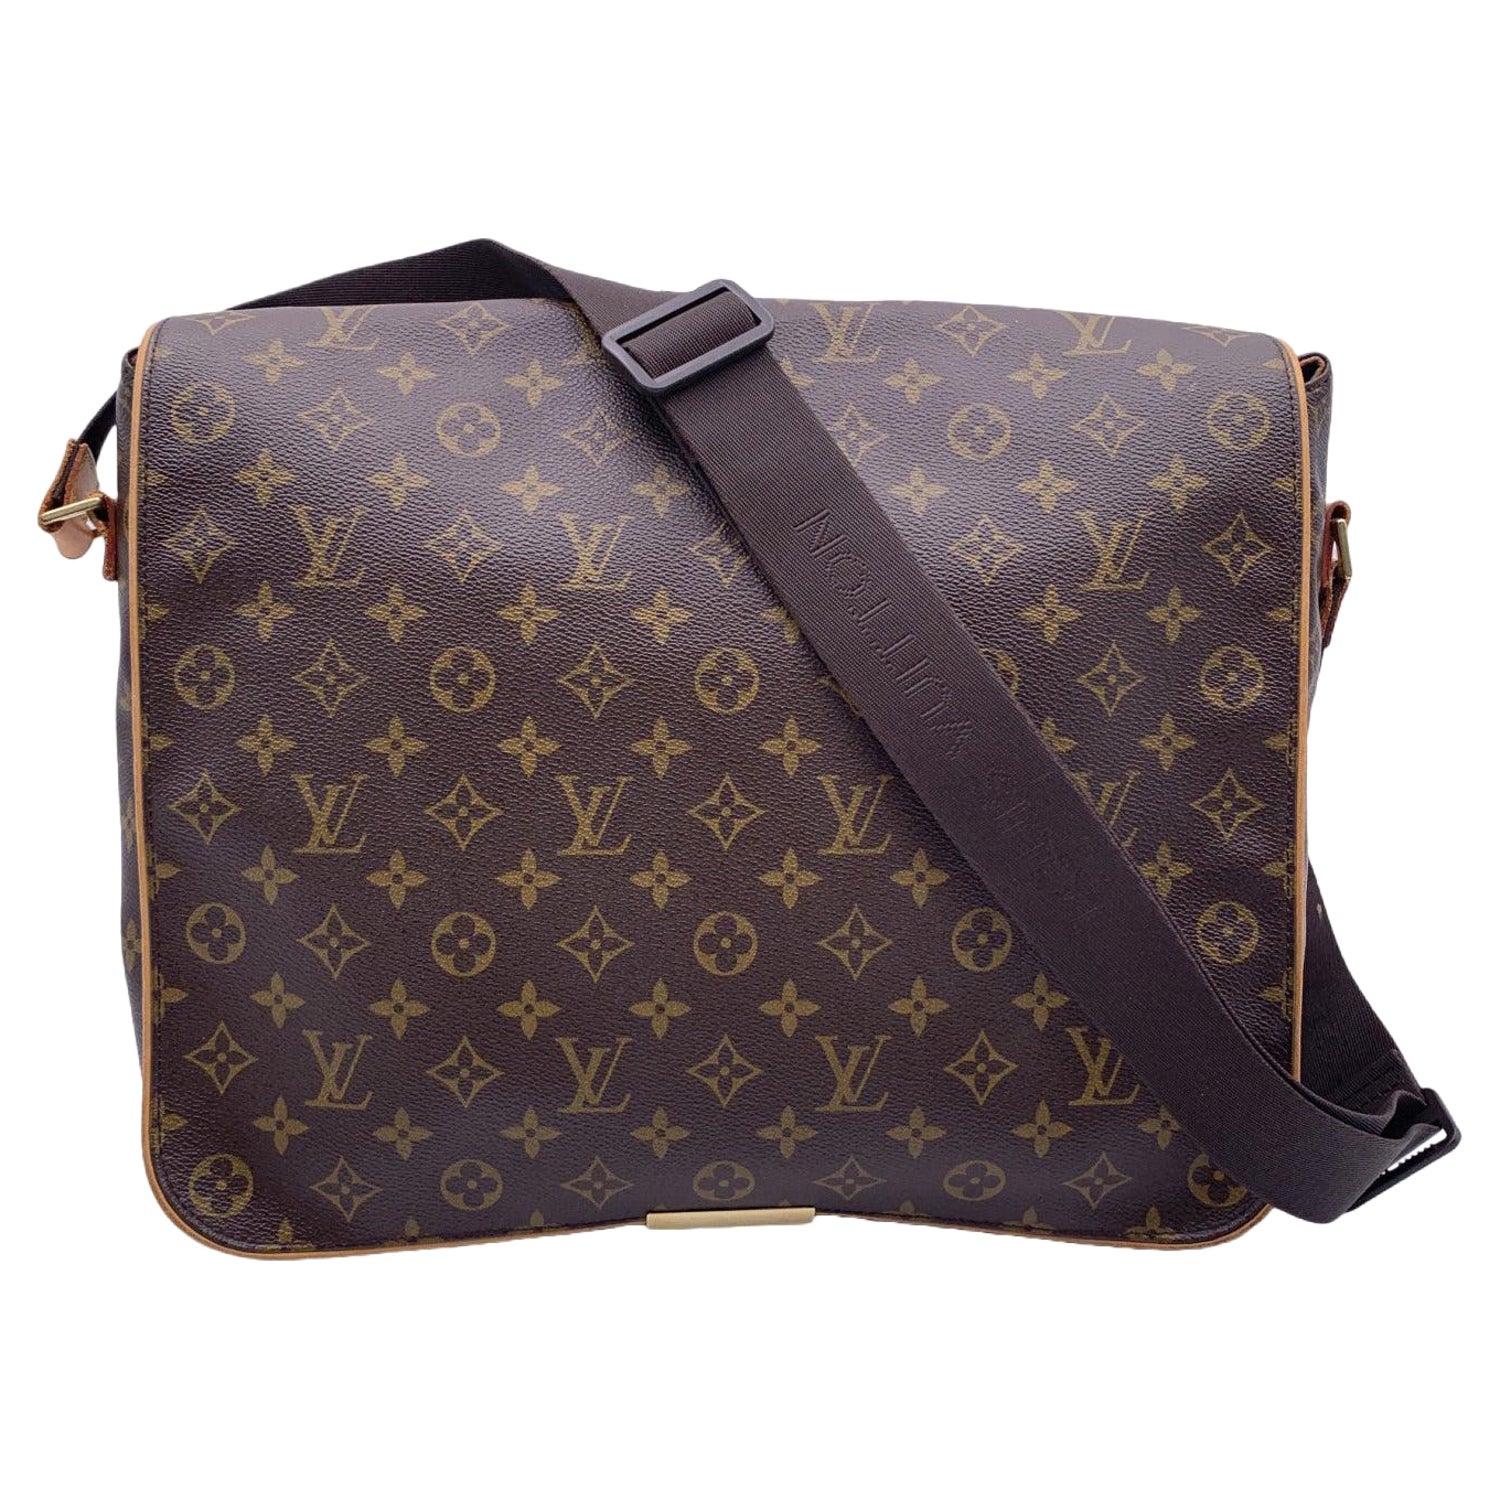 Louis Vuitton 2009 Pre-Owned Macassar Bass PM Tote Bag - Brown for